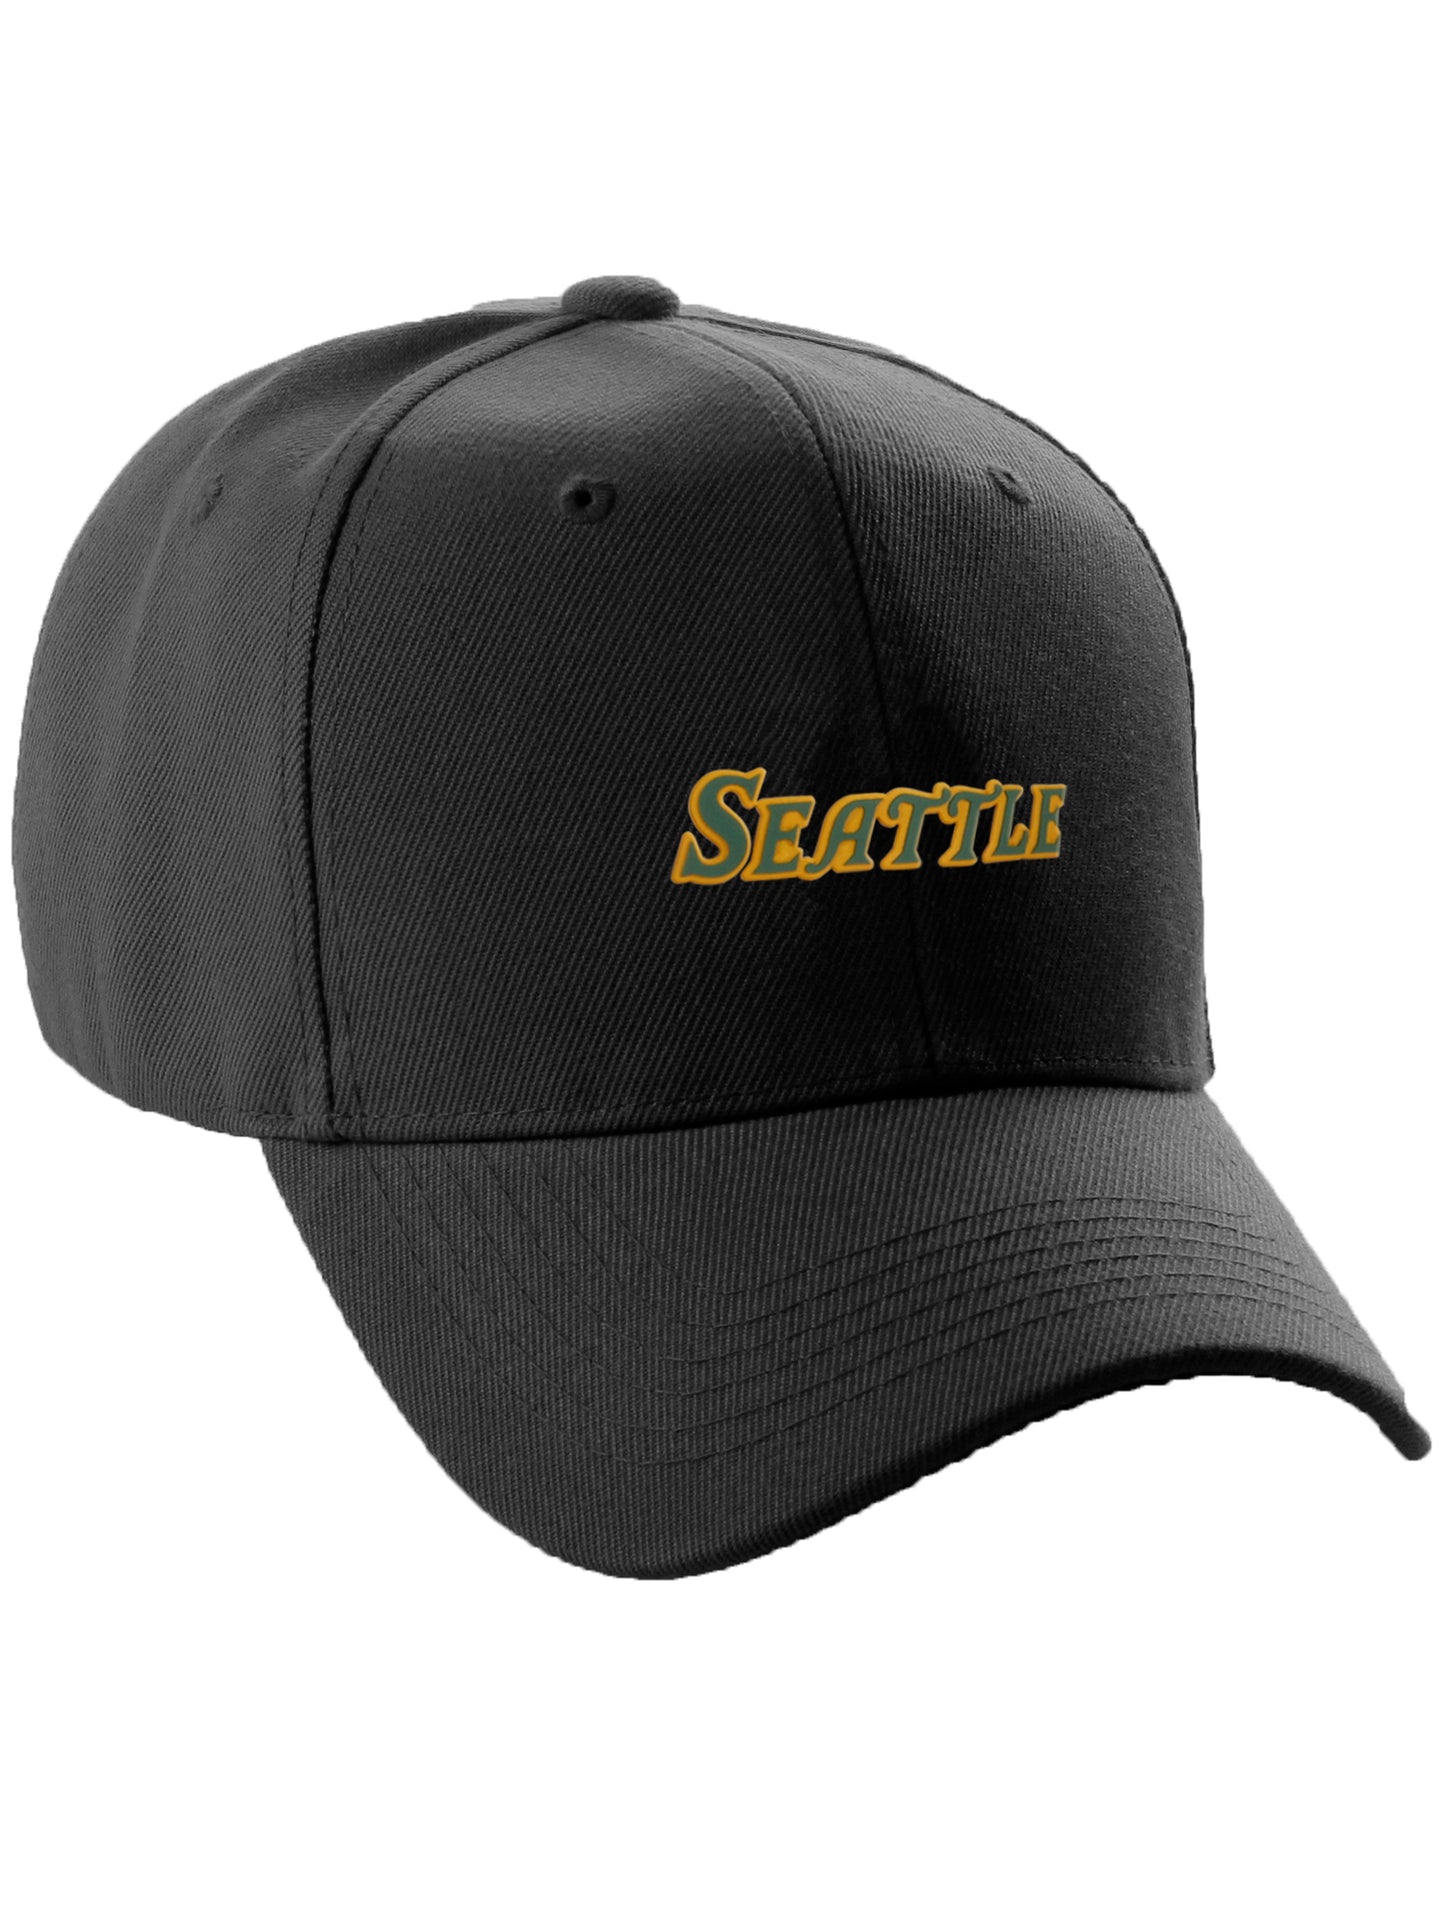 Daxton USA States Classic Curved Bill Mid Profile Structured Golf Dad Hat Cap